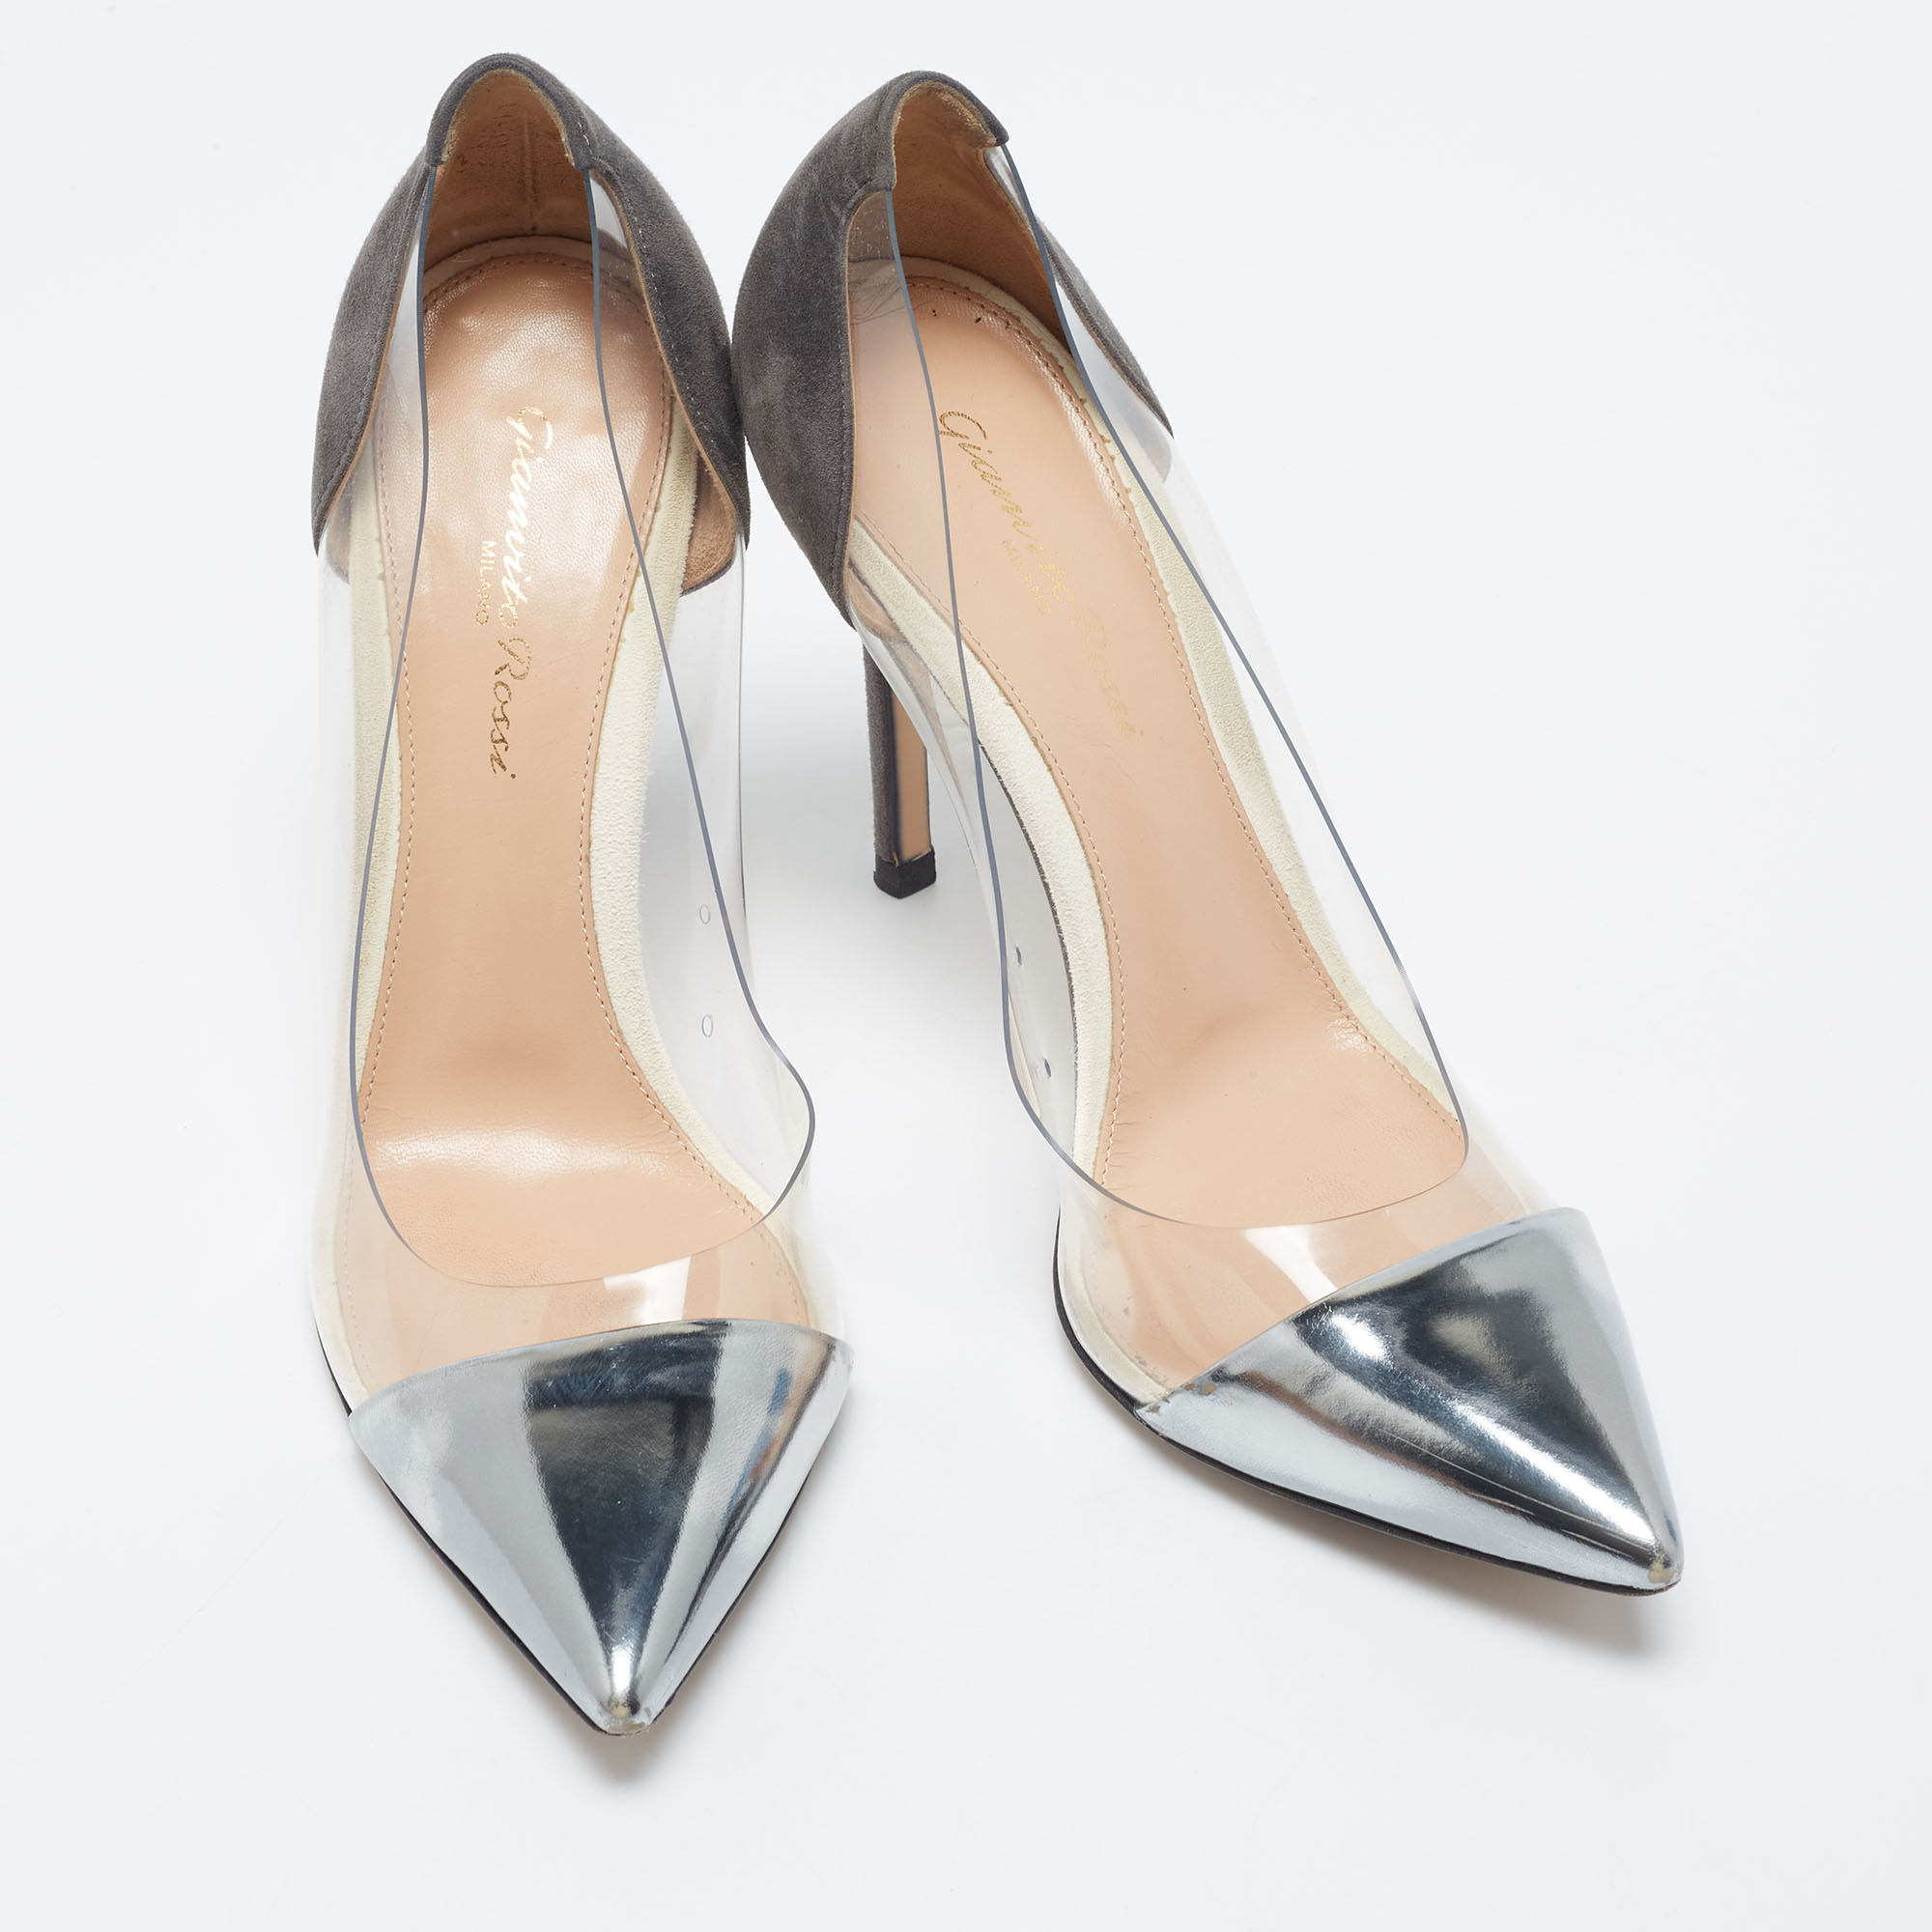 Gianvito Rossi Dark Grey Patent Leather And PVC Plexi Pointed Toe Pumps Size 38